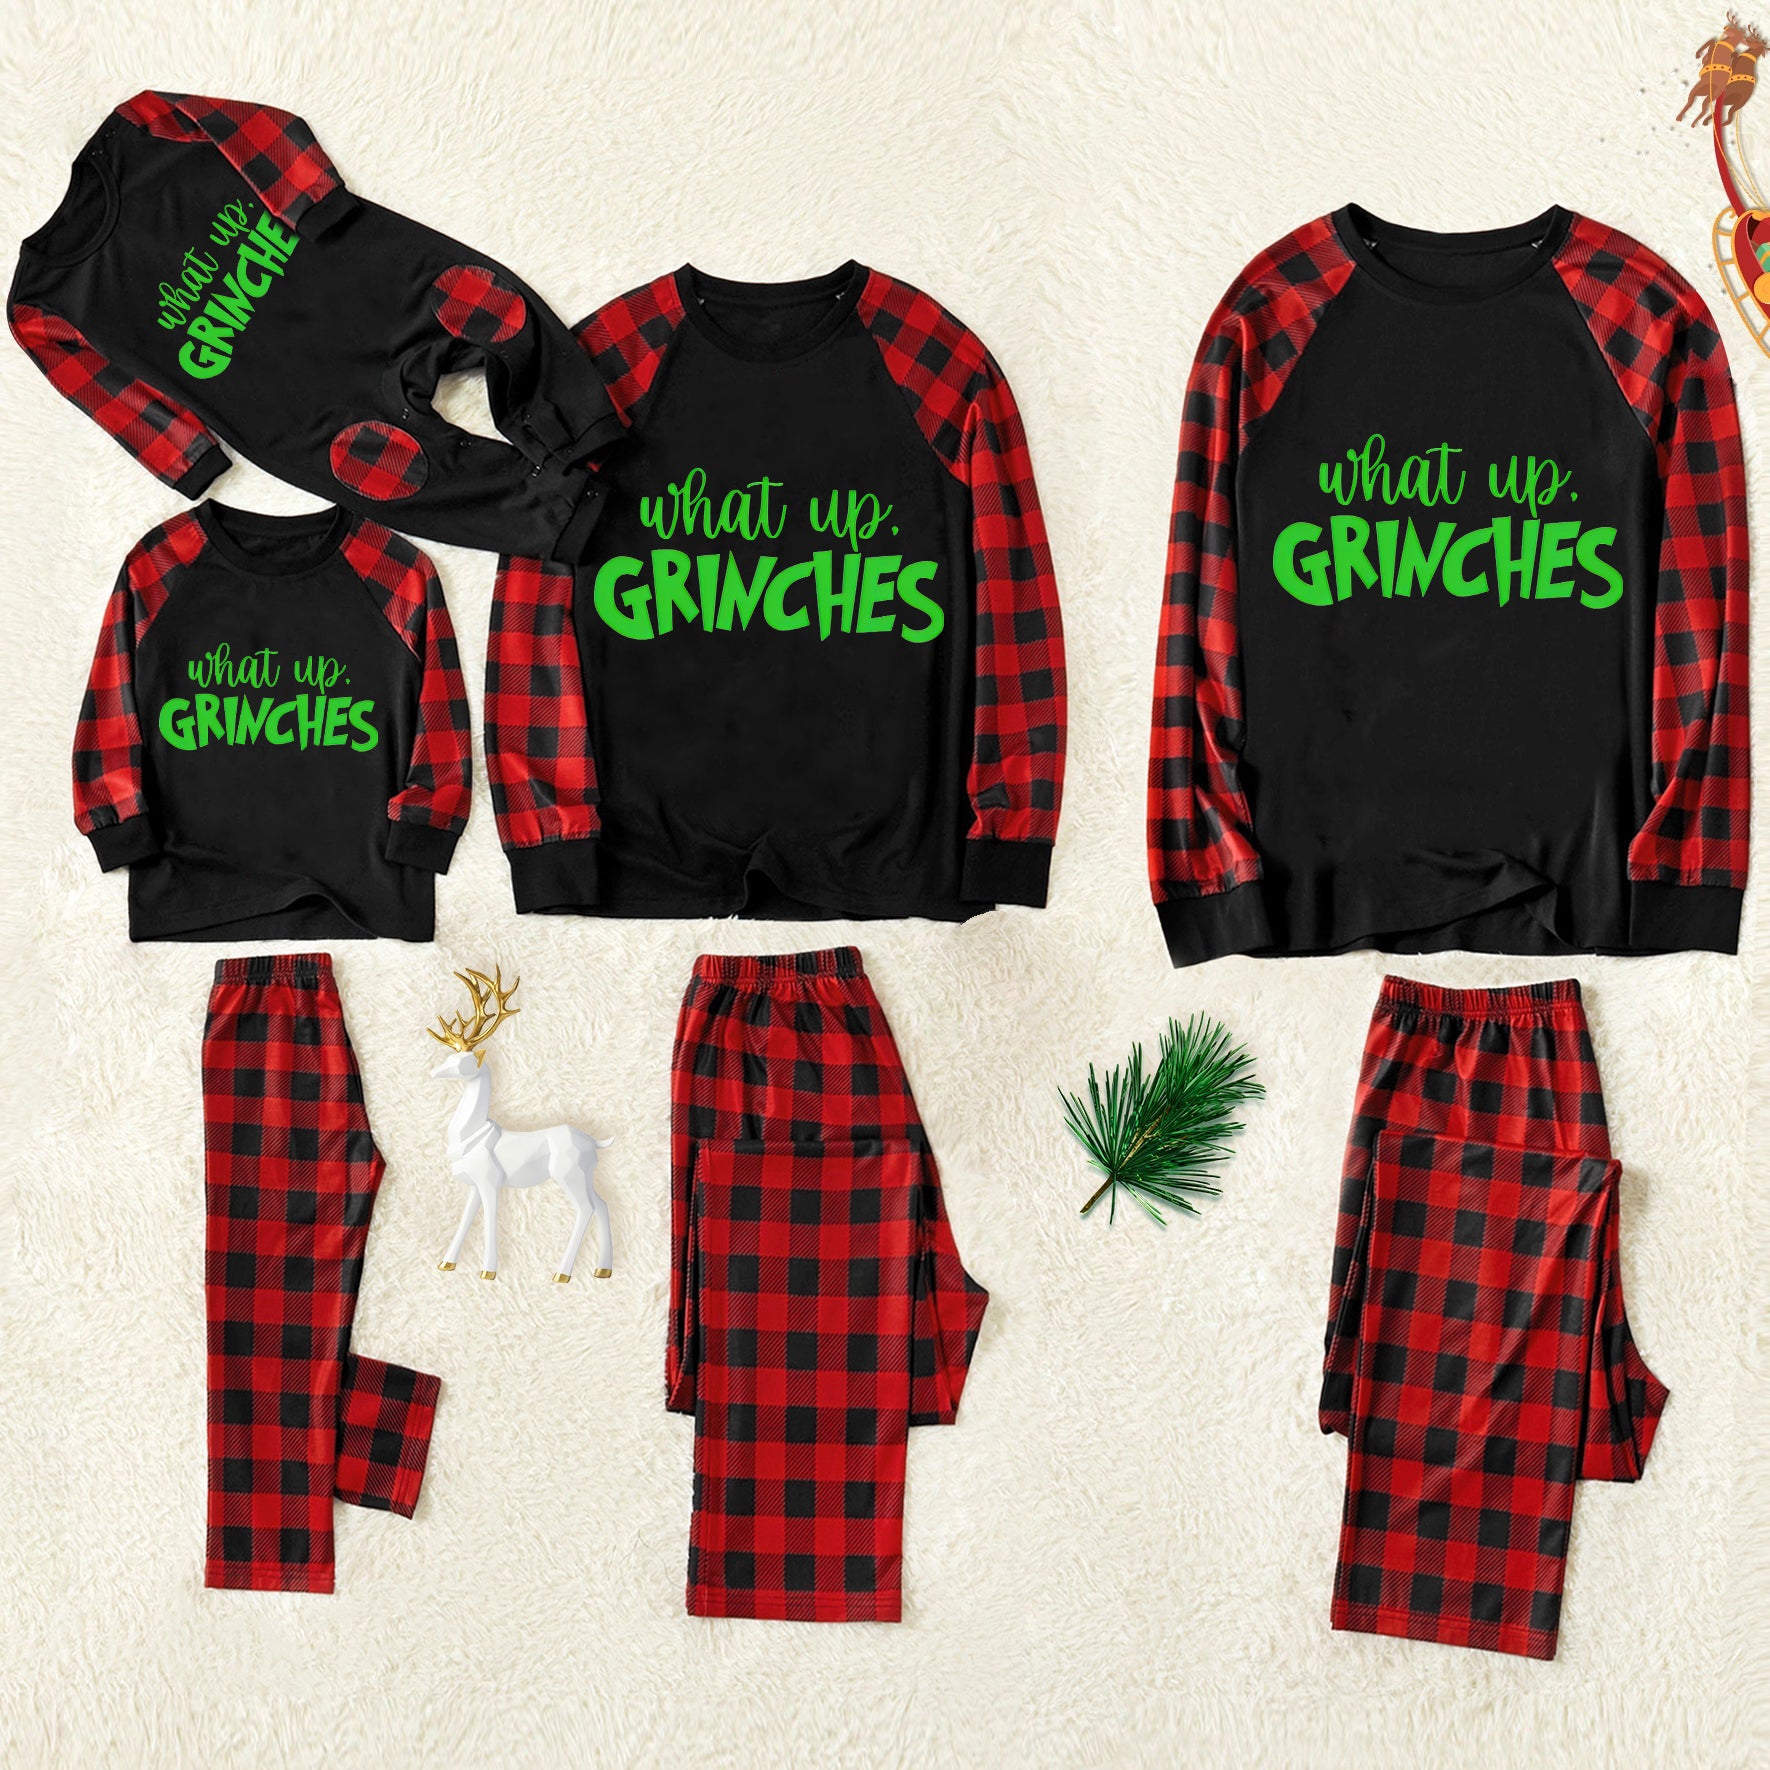 Christmas 'What Up' Letter Print Contrast Black Top and Black & Red Plaid Pants Family Matching Pajamas Set With Dog Bandana